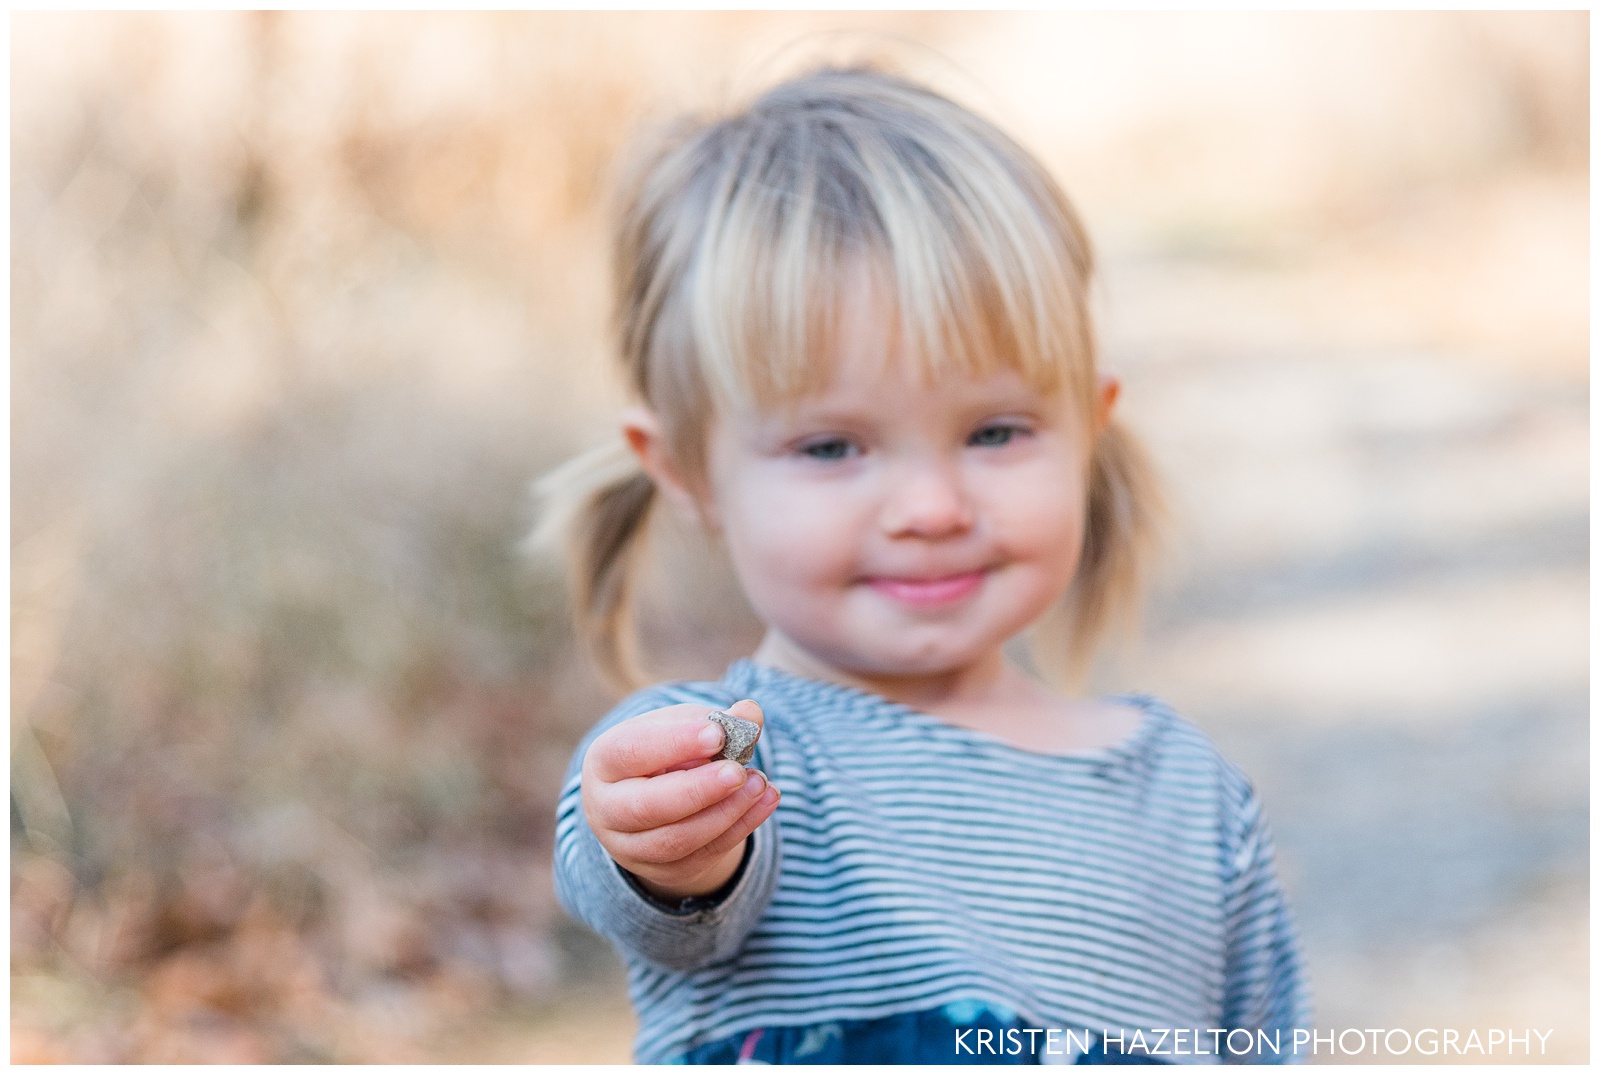 A toddler girl proudly displaying a rock